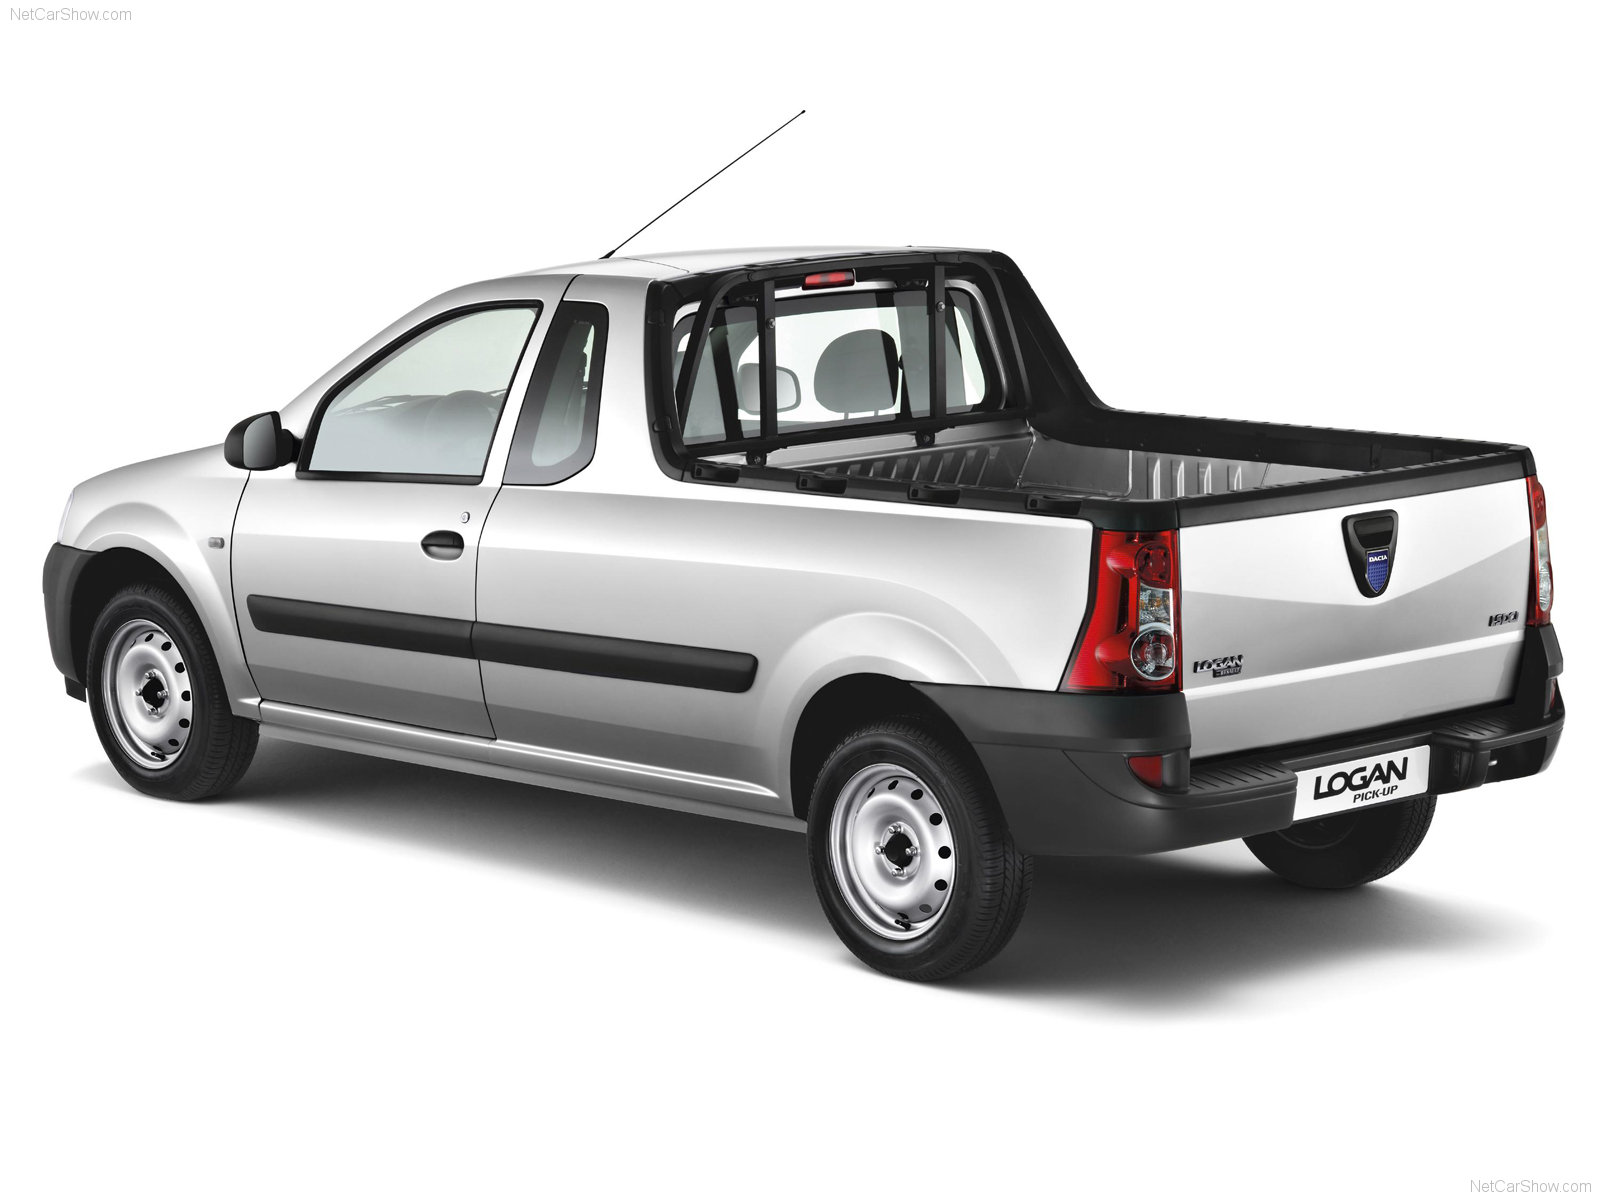 You can vote for this DACIA Logan Pickup photo